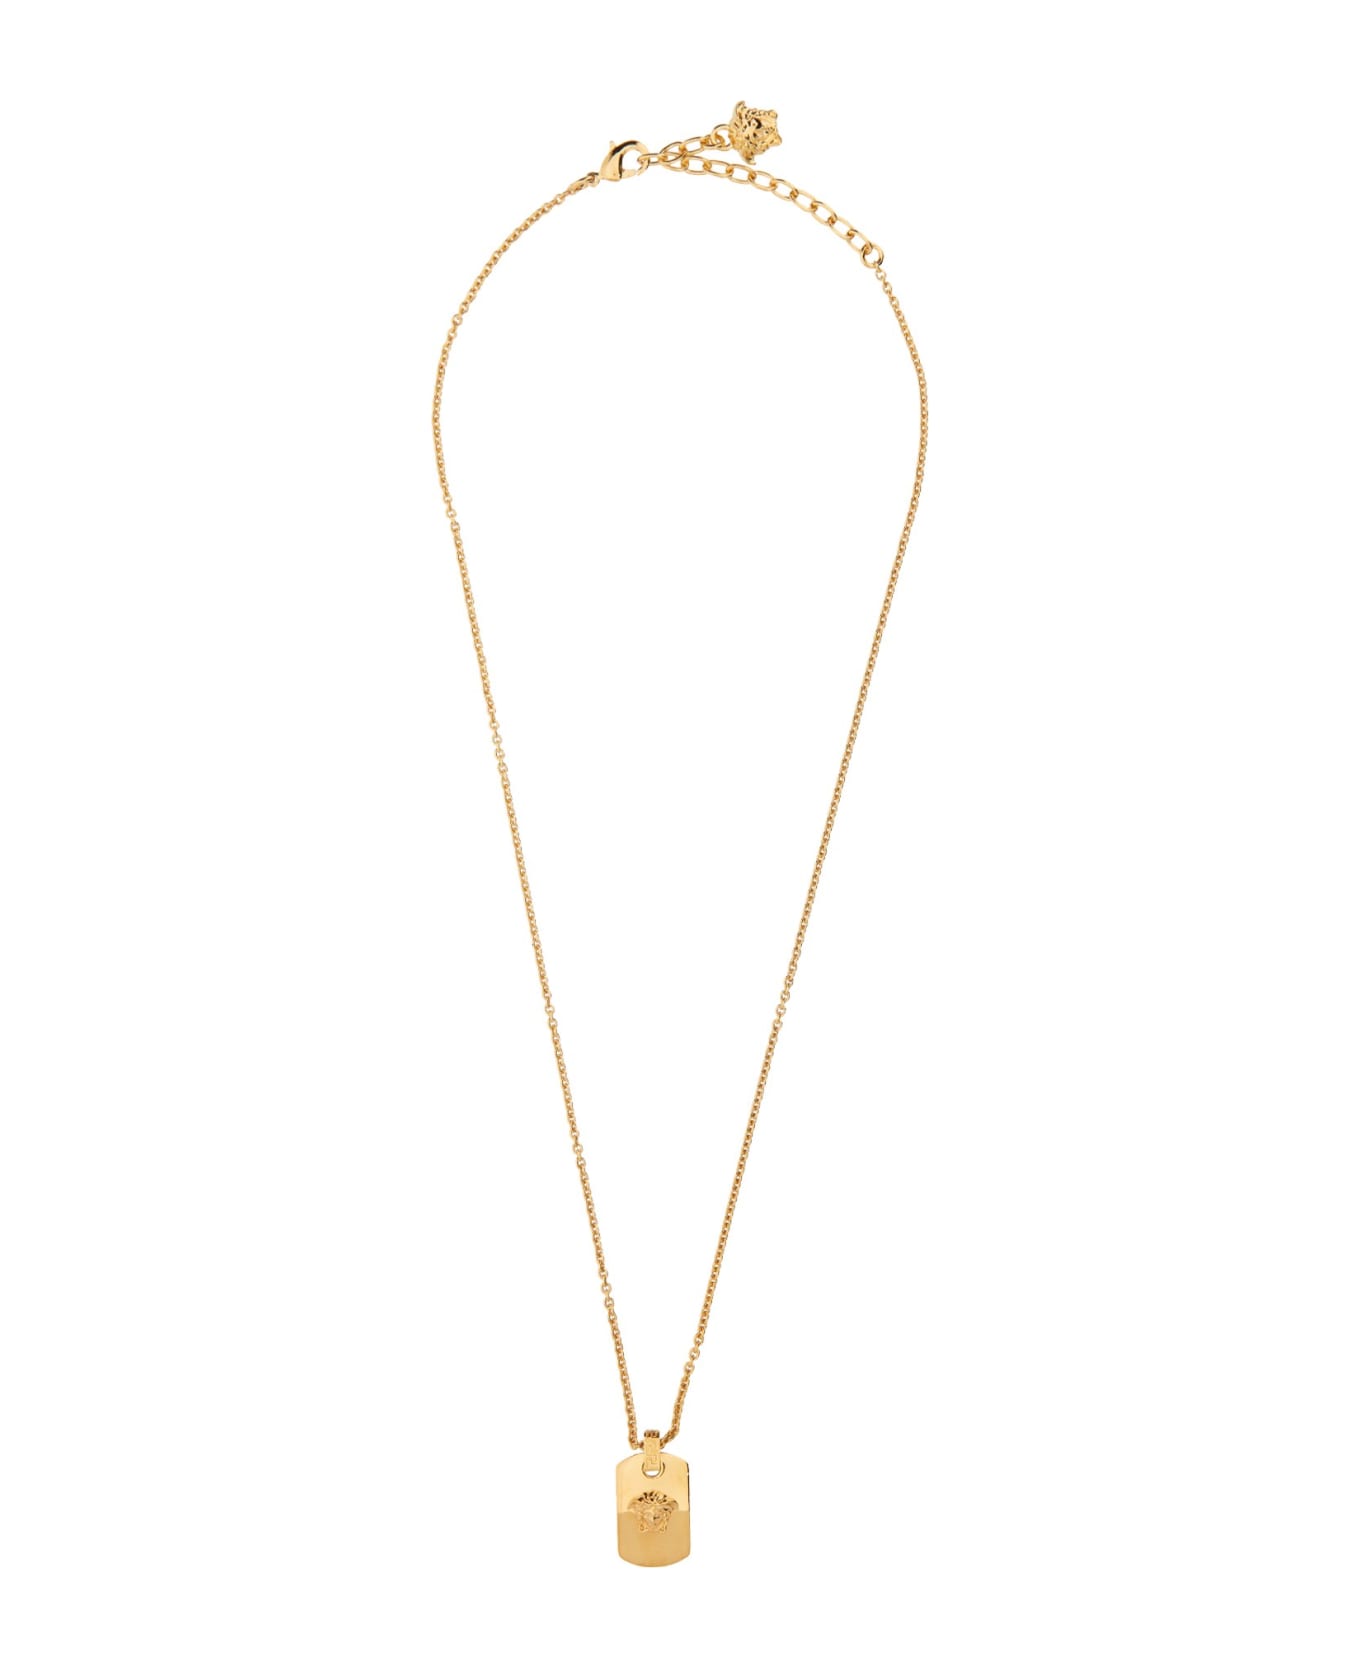 Versace Jellyfish Necklace - Gold ネックレス